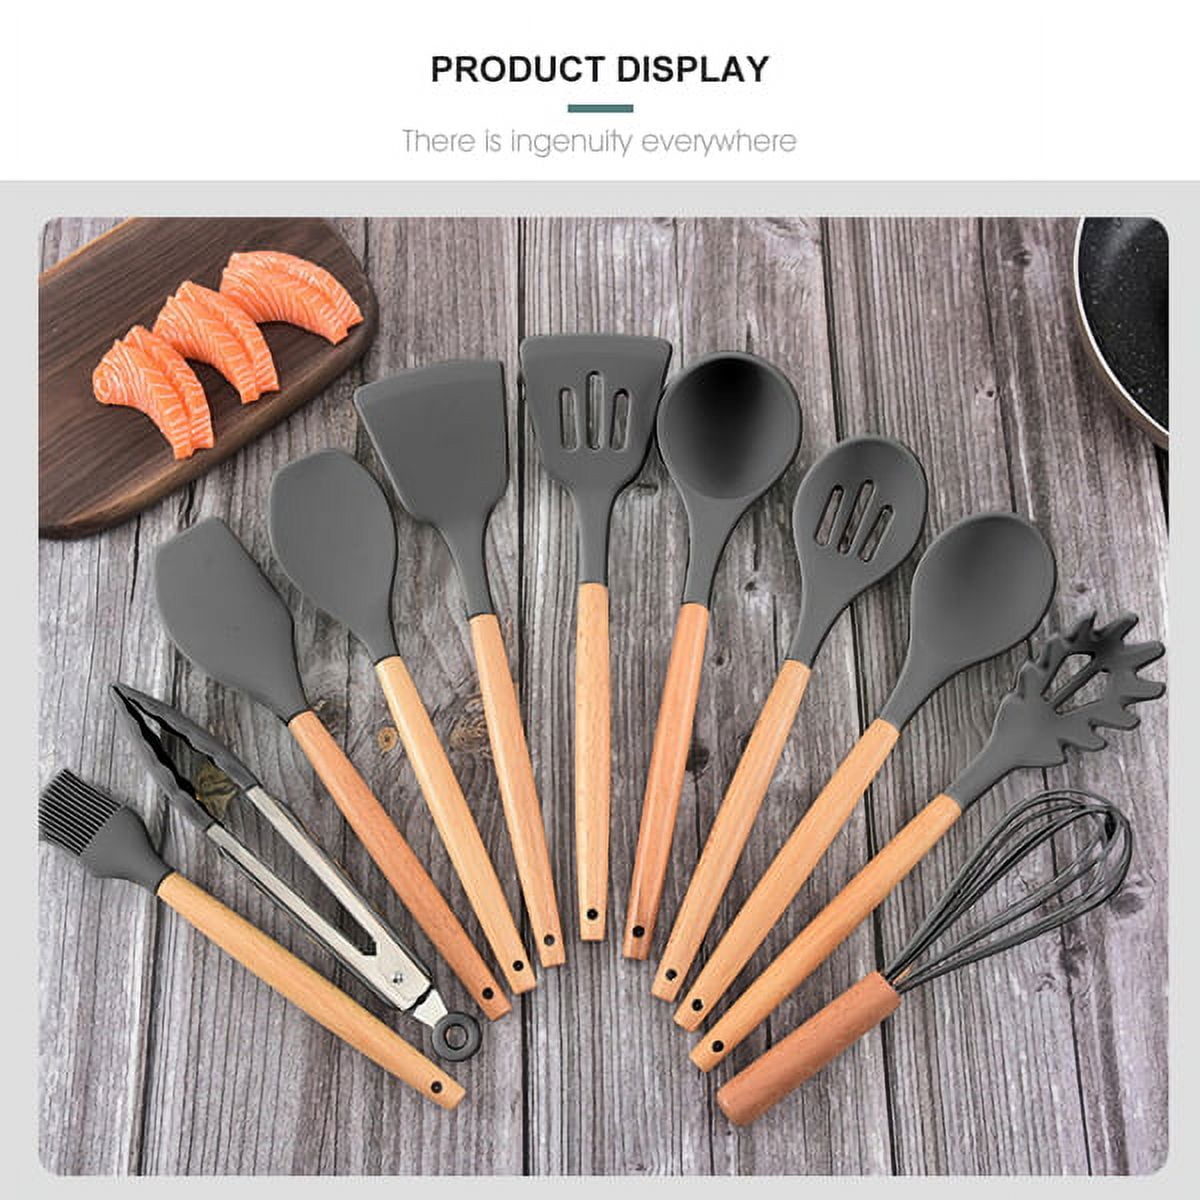 mossFlos Kitchen Cooking Utensils Set, 12 pcs Non-Stick Silicone Cooking  Kitchen Utensils with Holde…See more mossFlos Kitchen Cooking Utensils Set